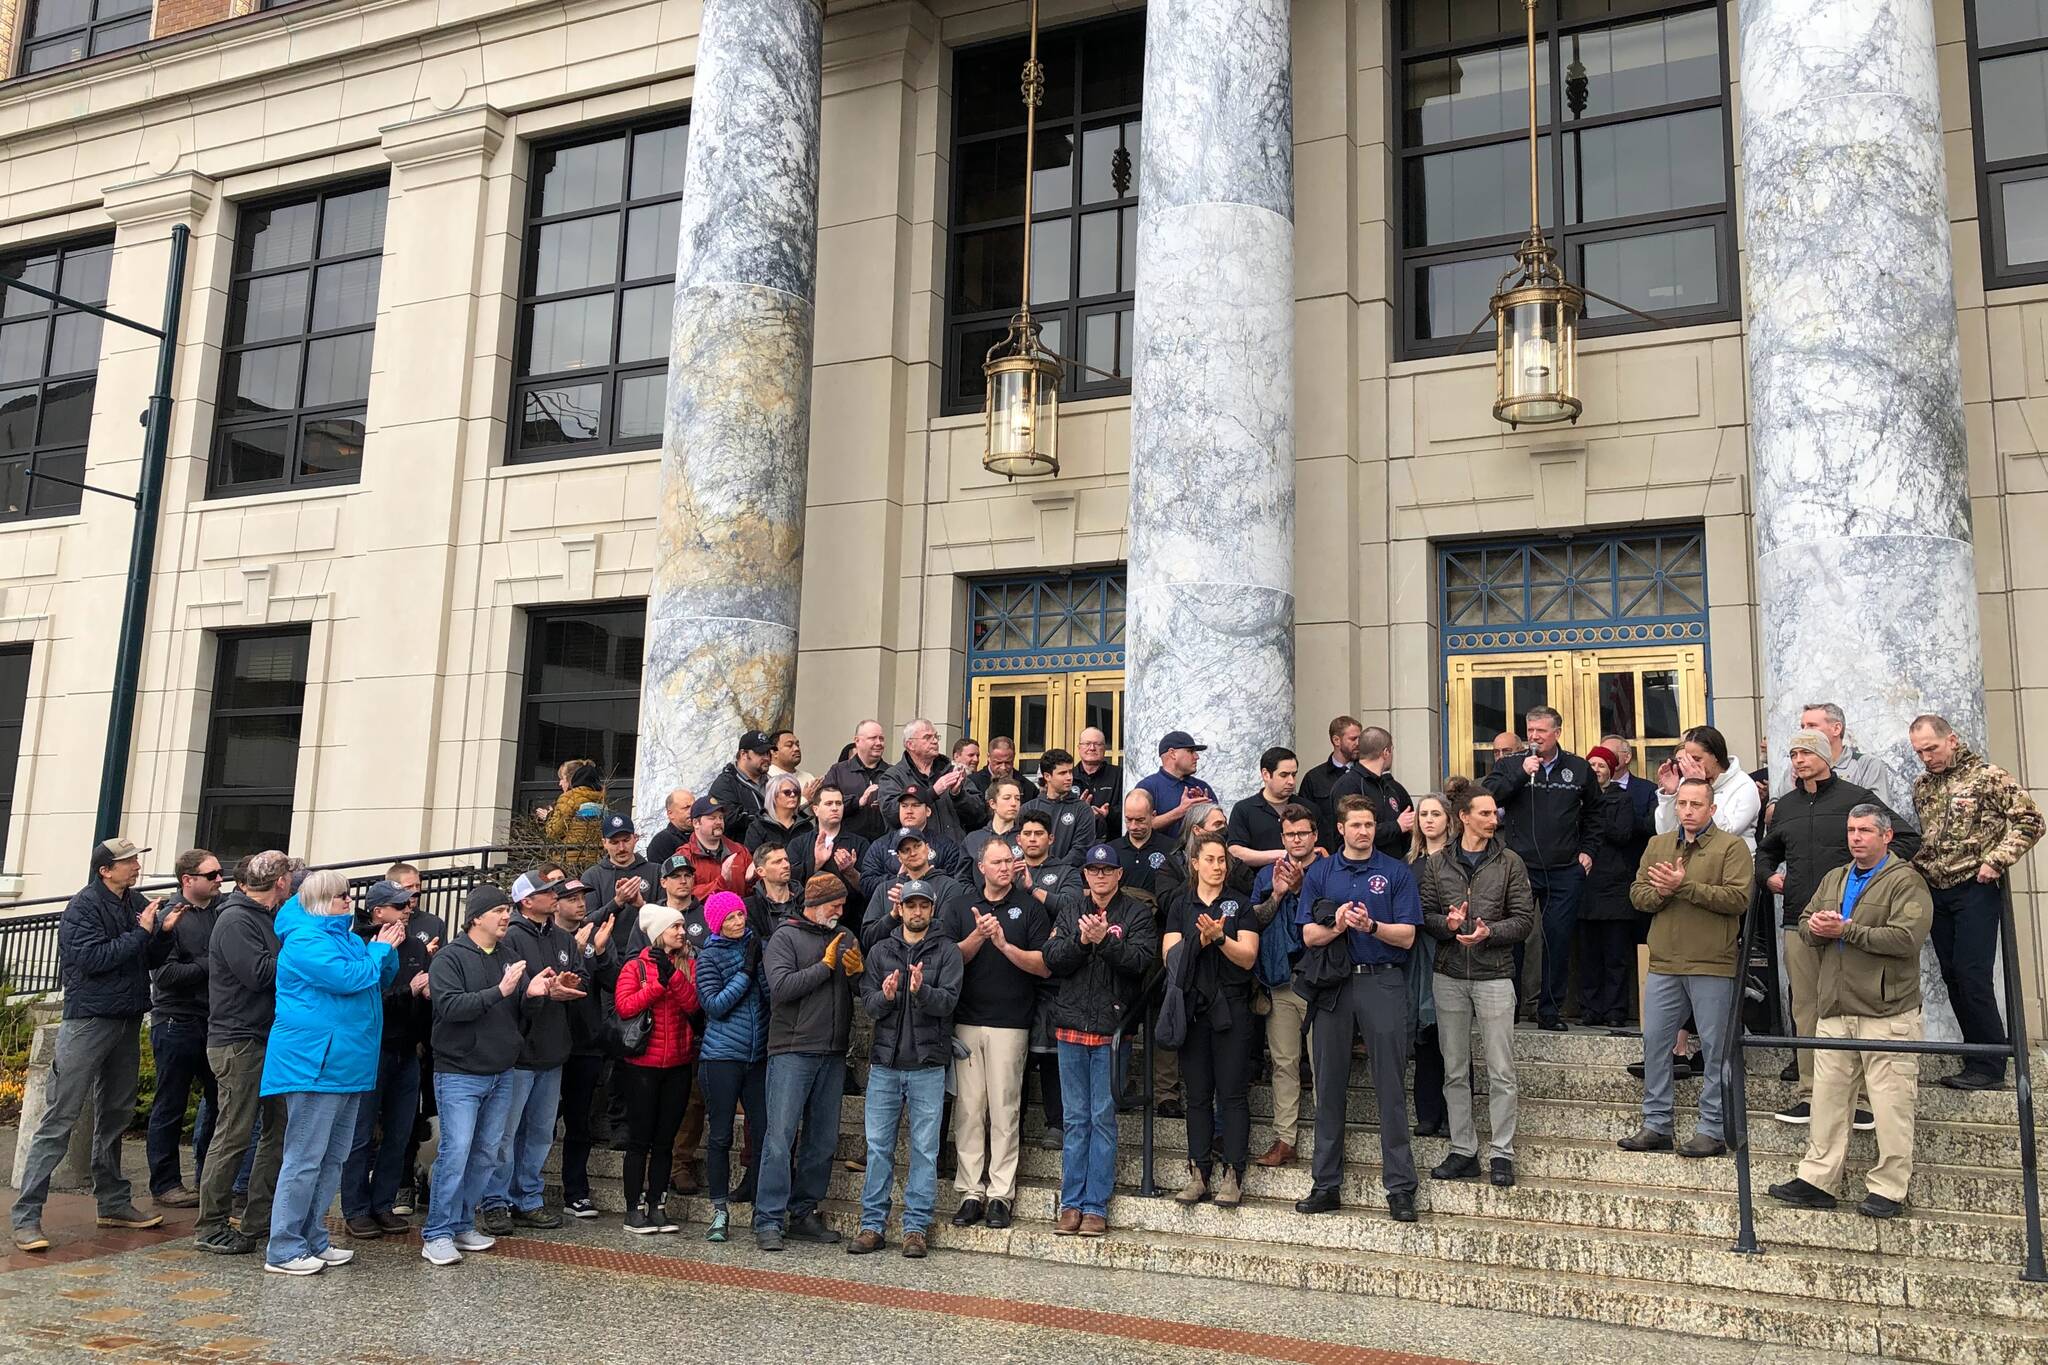 State and municipal public safety employees gathered on the steps of the Alaska State Captiol on Thursday, March 31, 2022, to urge senators to act on a bill to rework the state's pension system for police, fire fighters and other public safety employees. (Peter Segall / Juneau Empire)